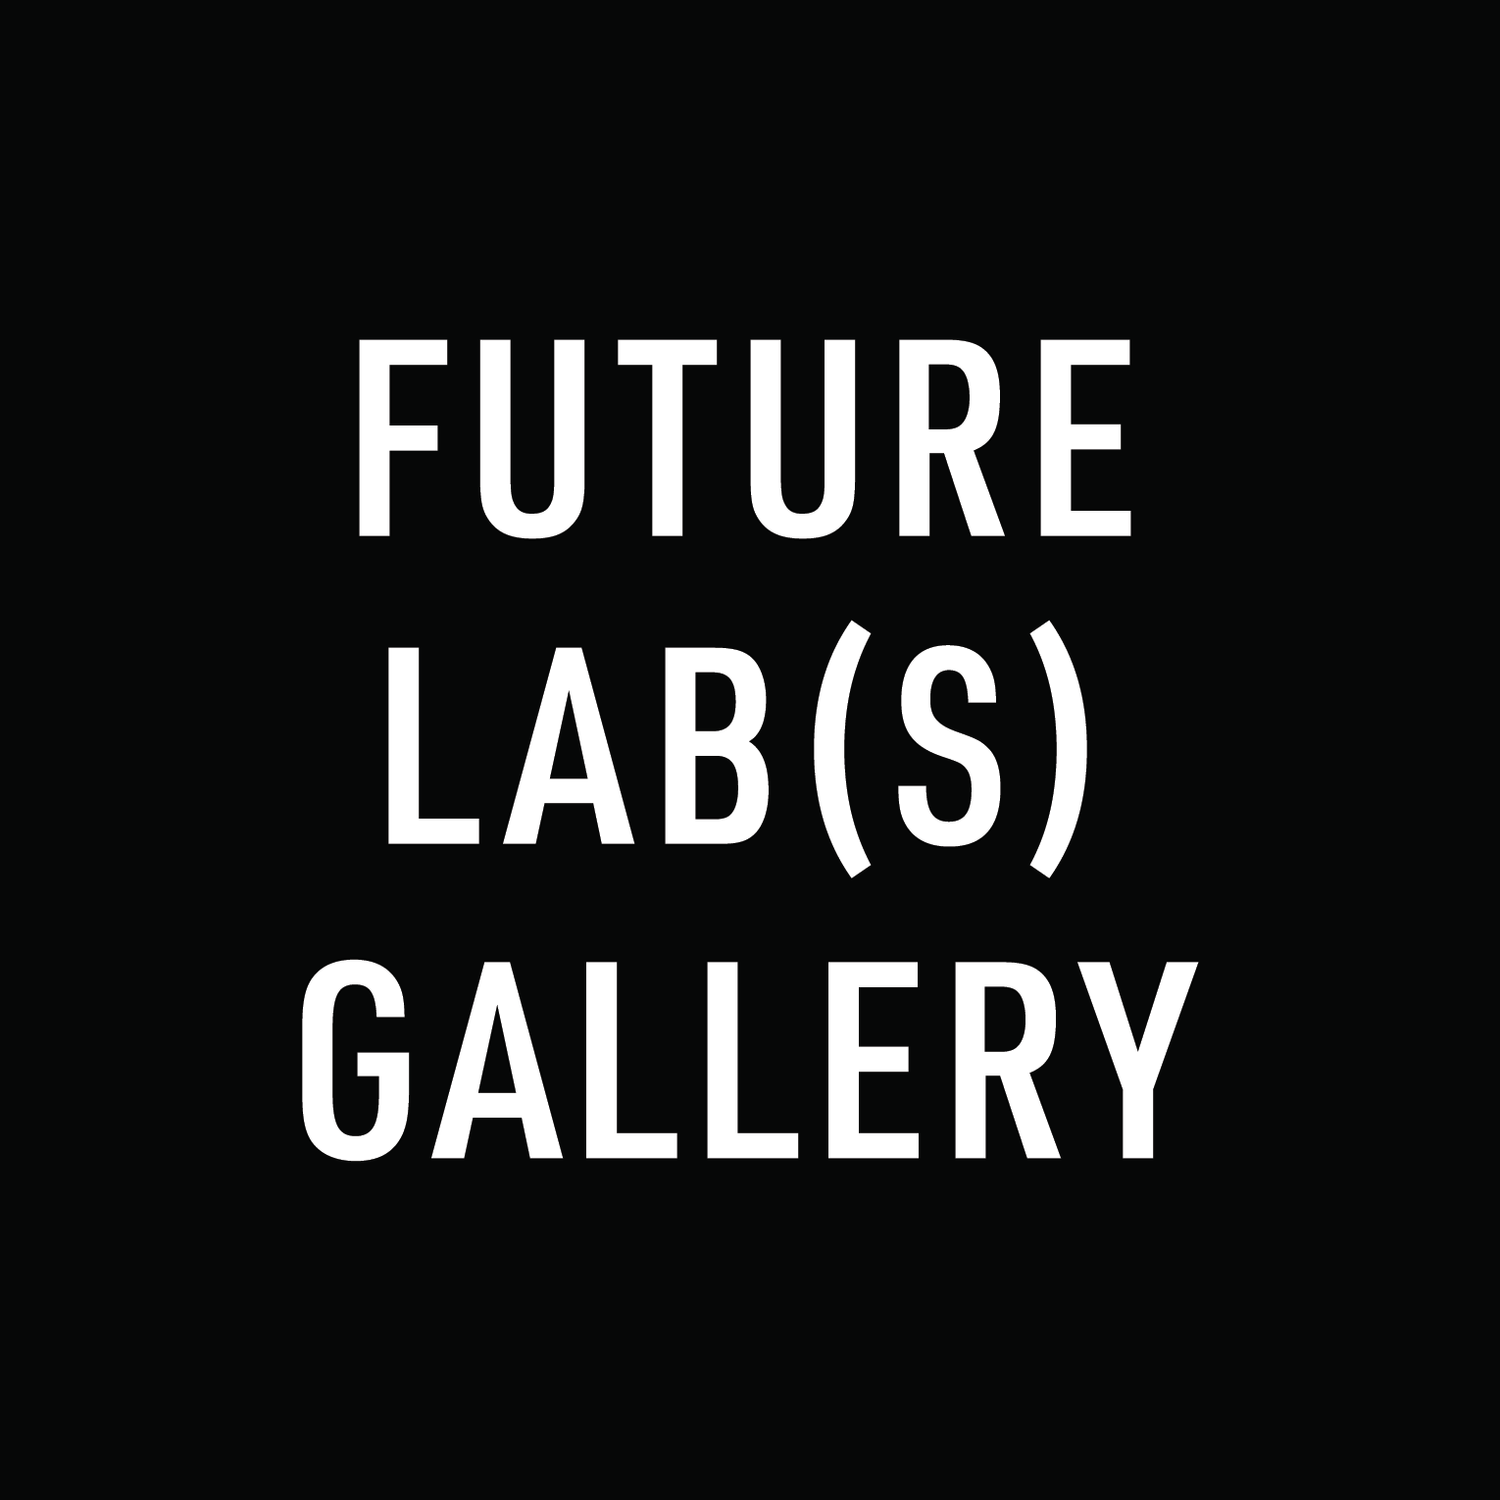 Future Labs Gallery